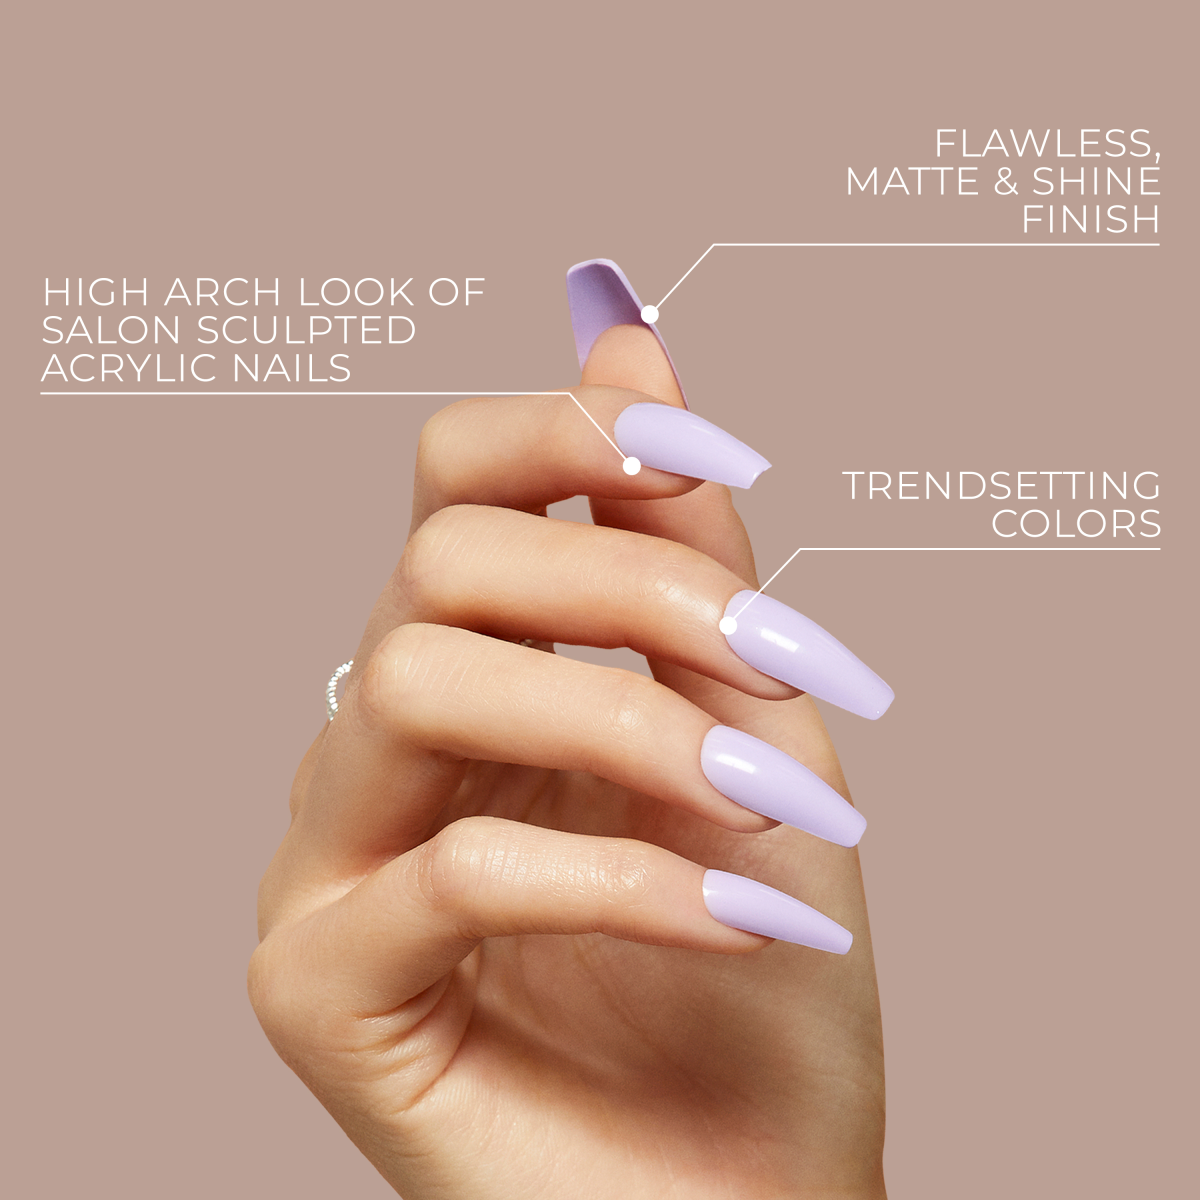 Manicure 101: All you need to know before getting acrylic nails | BURO.